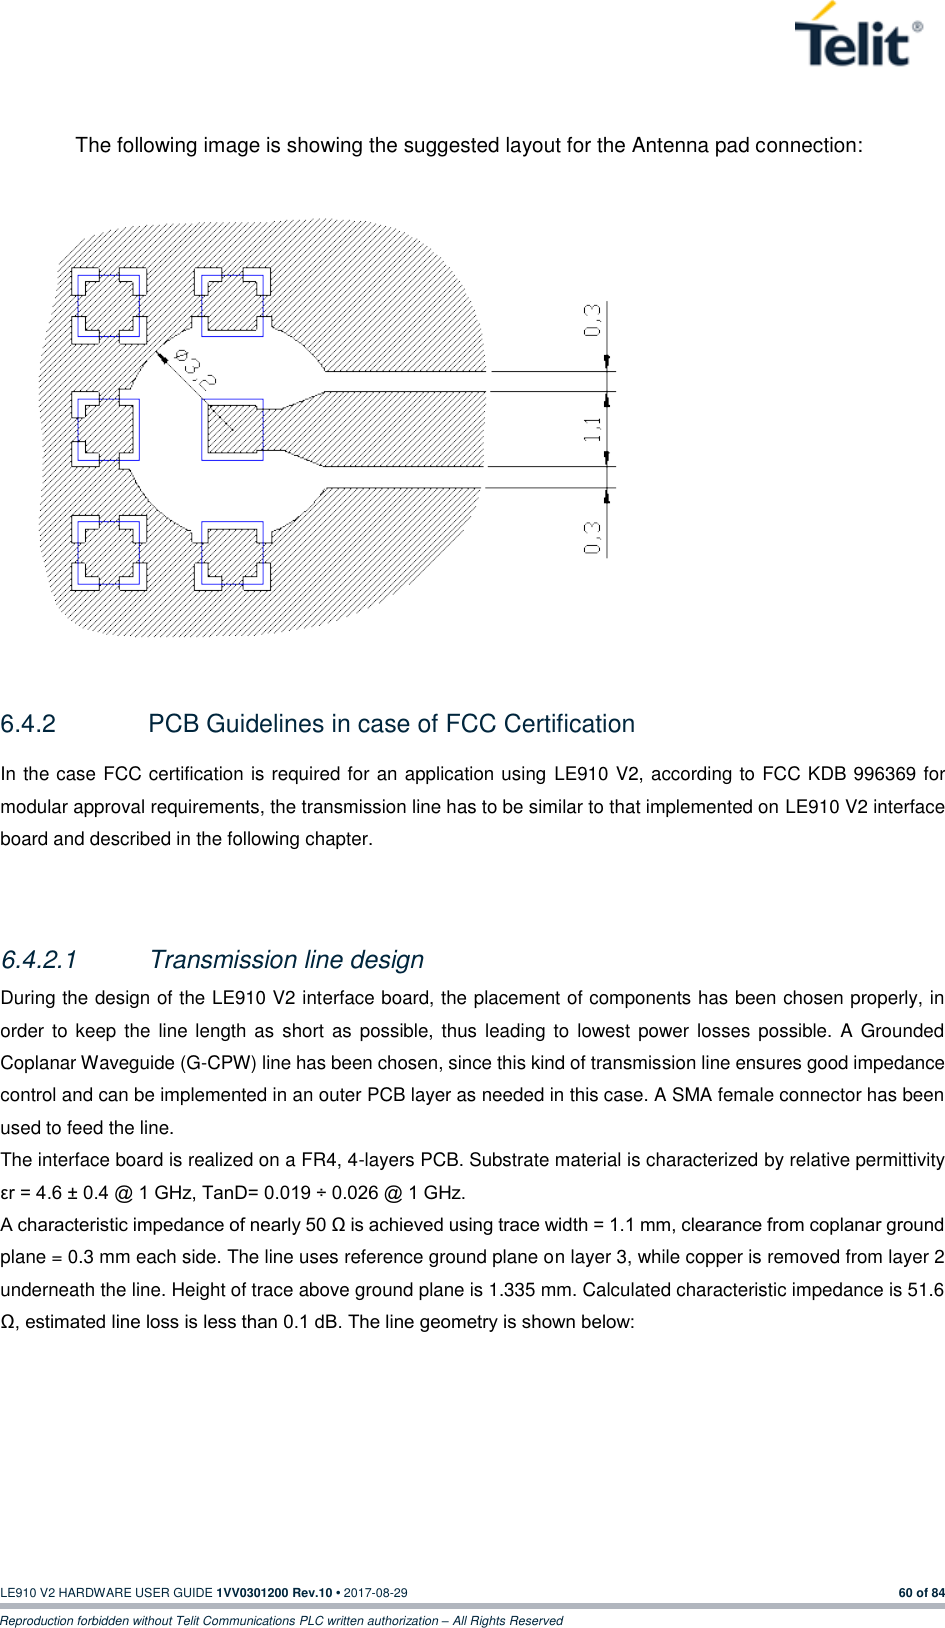   LE910 V2 HARDWARE USER GUIDE 1VV0301200 Rev.10 • 2017-08-29  60 of 84 Reproduction forbidden without Telit Communications PLC written authorization – All Rights Reserved  The following image is showing the suggested layout for the Antenna pad connection:               6.4.2  PCB Guidelines in case of FCC Certification In the case FCC certification is required for an application using LE910 V2, according to FCC KDB 996369 for modular approval requirements, the transmission line has to be similar to that implemented on LE910 V2 interface board and described in the following chapter.  6.4.2.1  Transmission line design During the design of the LE910 V2 interface board, the placement of components has been chosen properly, in order  to keep  the  line length as  short  as possible, thus leading to  lowest power losses possible. A Grounded Coplanar Waveguide (G-CPW) line has been chosen, since this kind of transmission line ensures good impedance control and can be implemented in an outer PCB layer as needed in this case. A SMA female connector has been used to feed the line. The interface board is realized on a FR4, 4-layers PCB. Substrate material is characterized by relative permittivity εr = 4.6 ± 0.4 @ 1 GHz, TanD= 0.019 ÷ 0.026 @ 1 GHz. A characteristic impedance of nearly 50 Ω is achieved using trace width = 1.1 mm, clearance from coplanar ground plane = 0.3 mm each side. The line uses reference ground plane on layer 3, while copper is removed from layer 2 underneath the line. Height of trace above ground plane is 1.335 mm. Calculated characteristic impedance is 51.6 Ω, estimated line loss is less than 0.1 dB. The line geometry is shown below: 